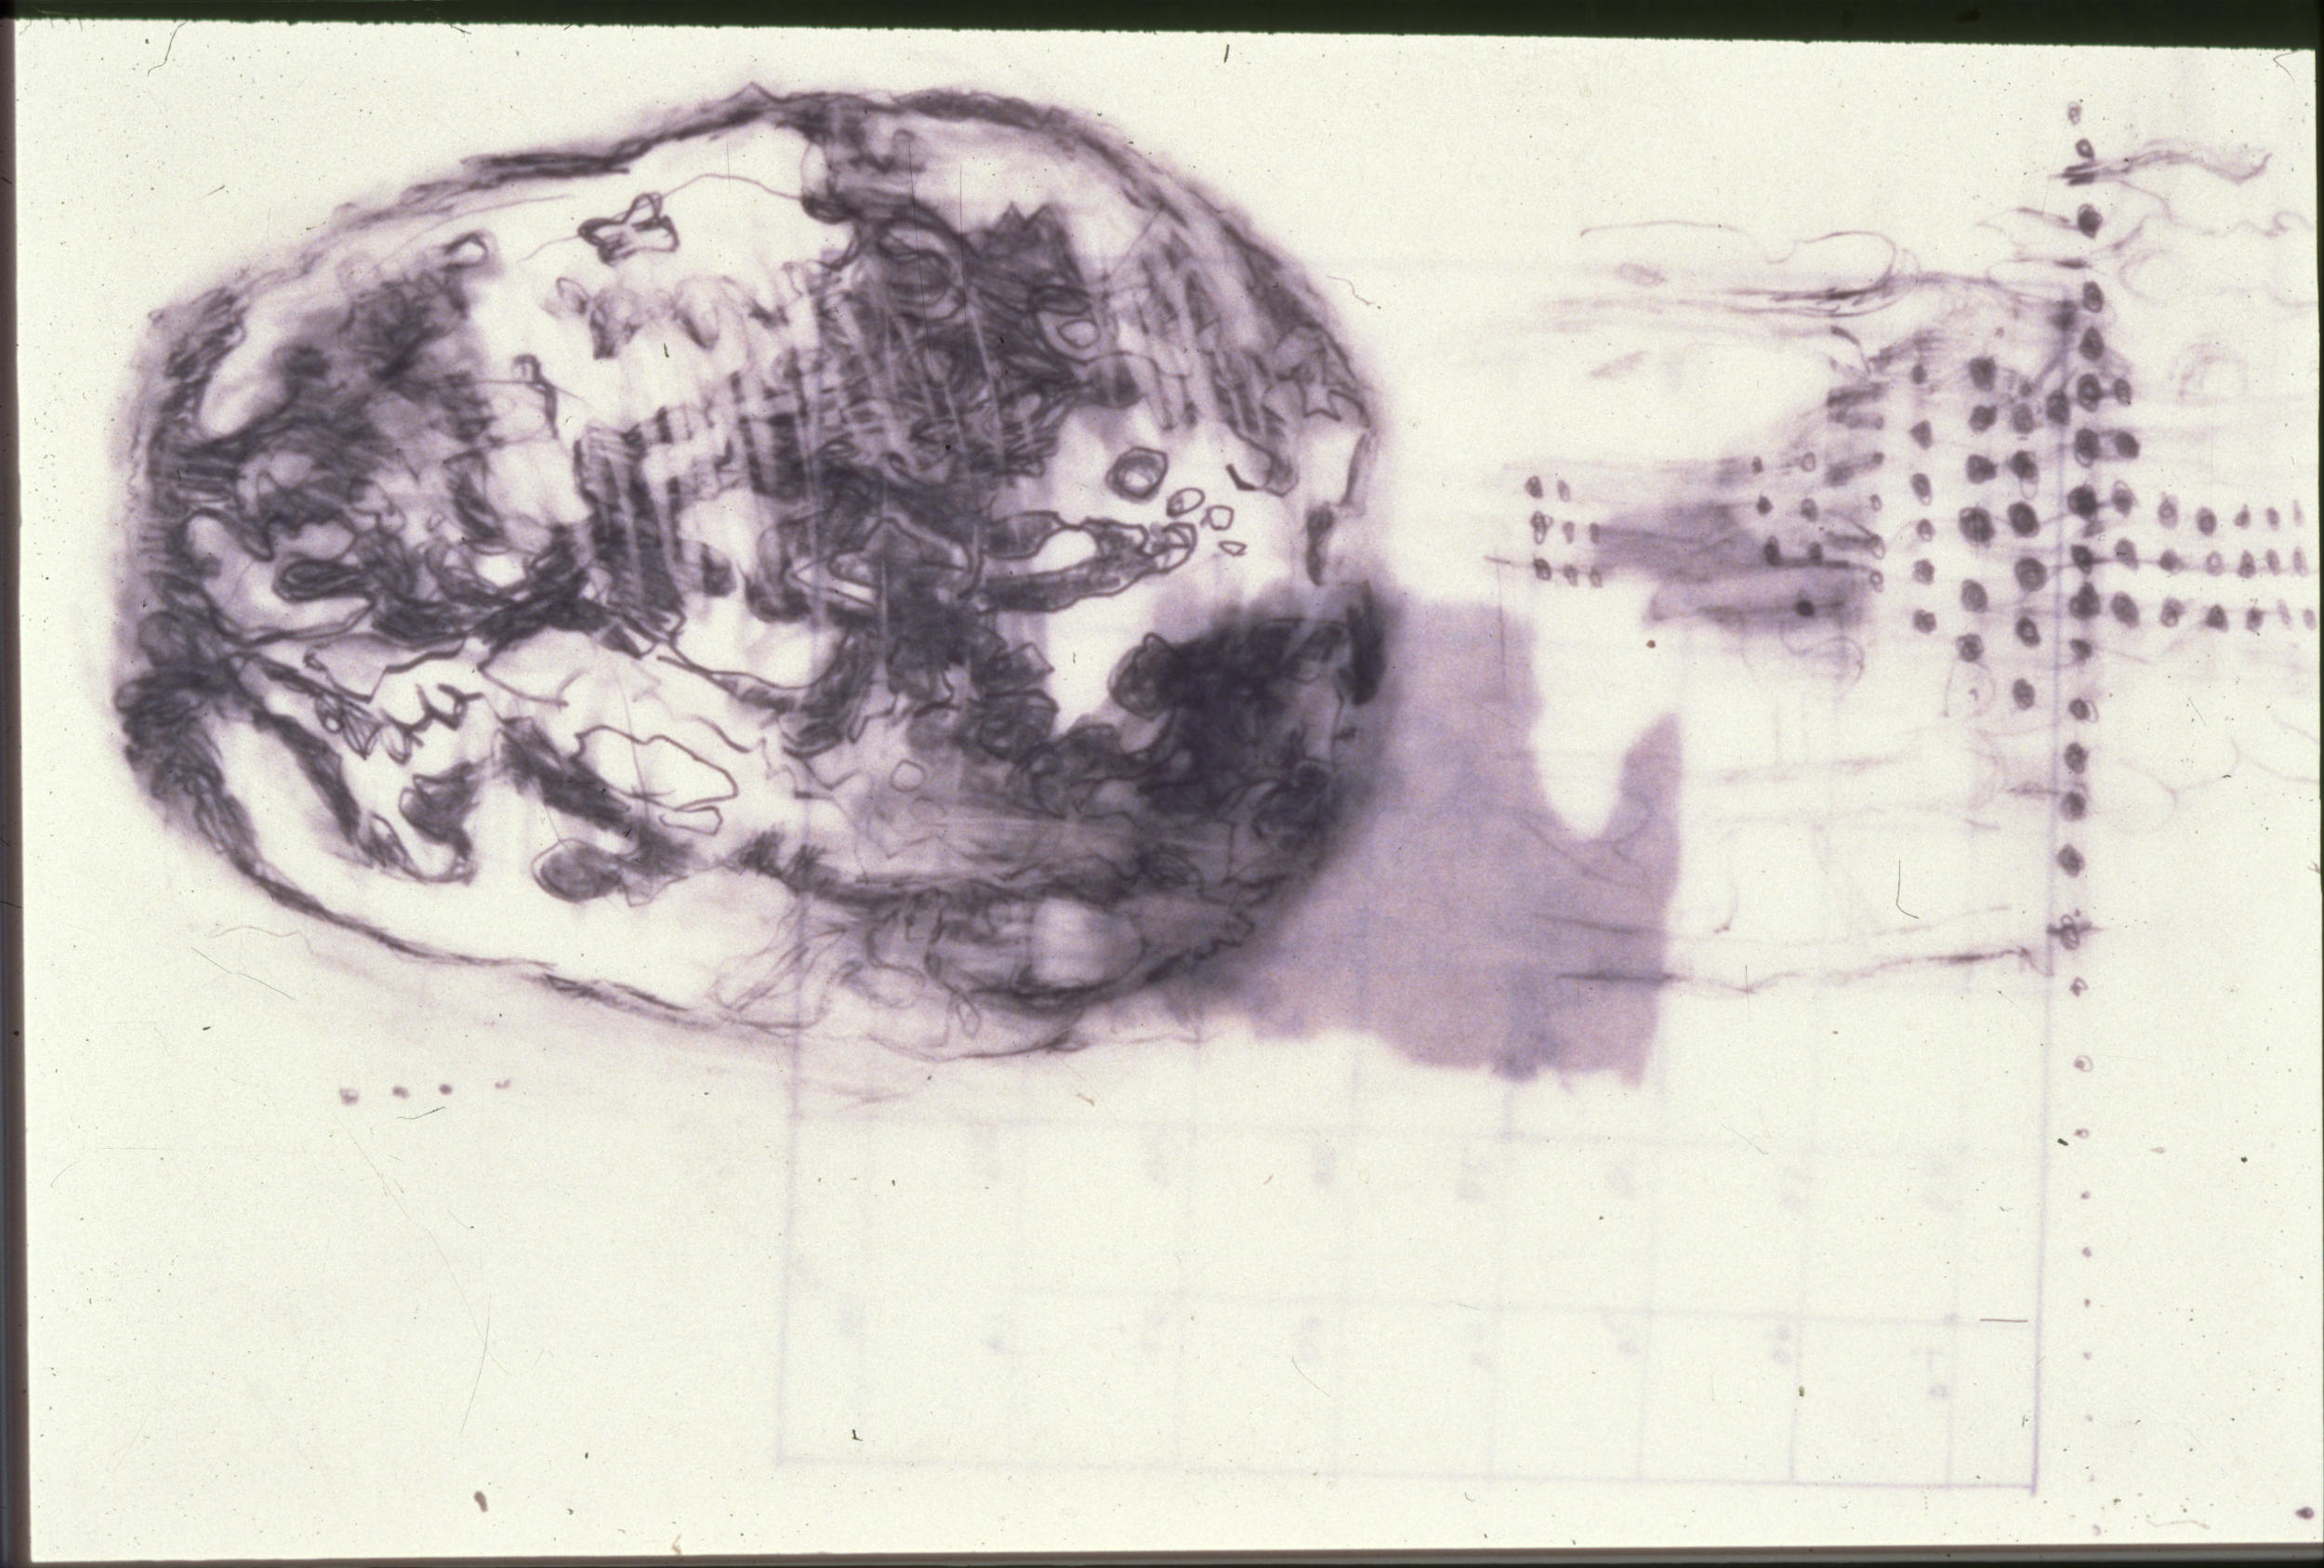 Mapping of Memories Series No. 7, graphite on Mylar, 9 x 12 inches, 2001